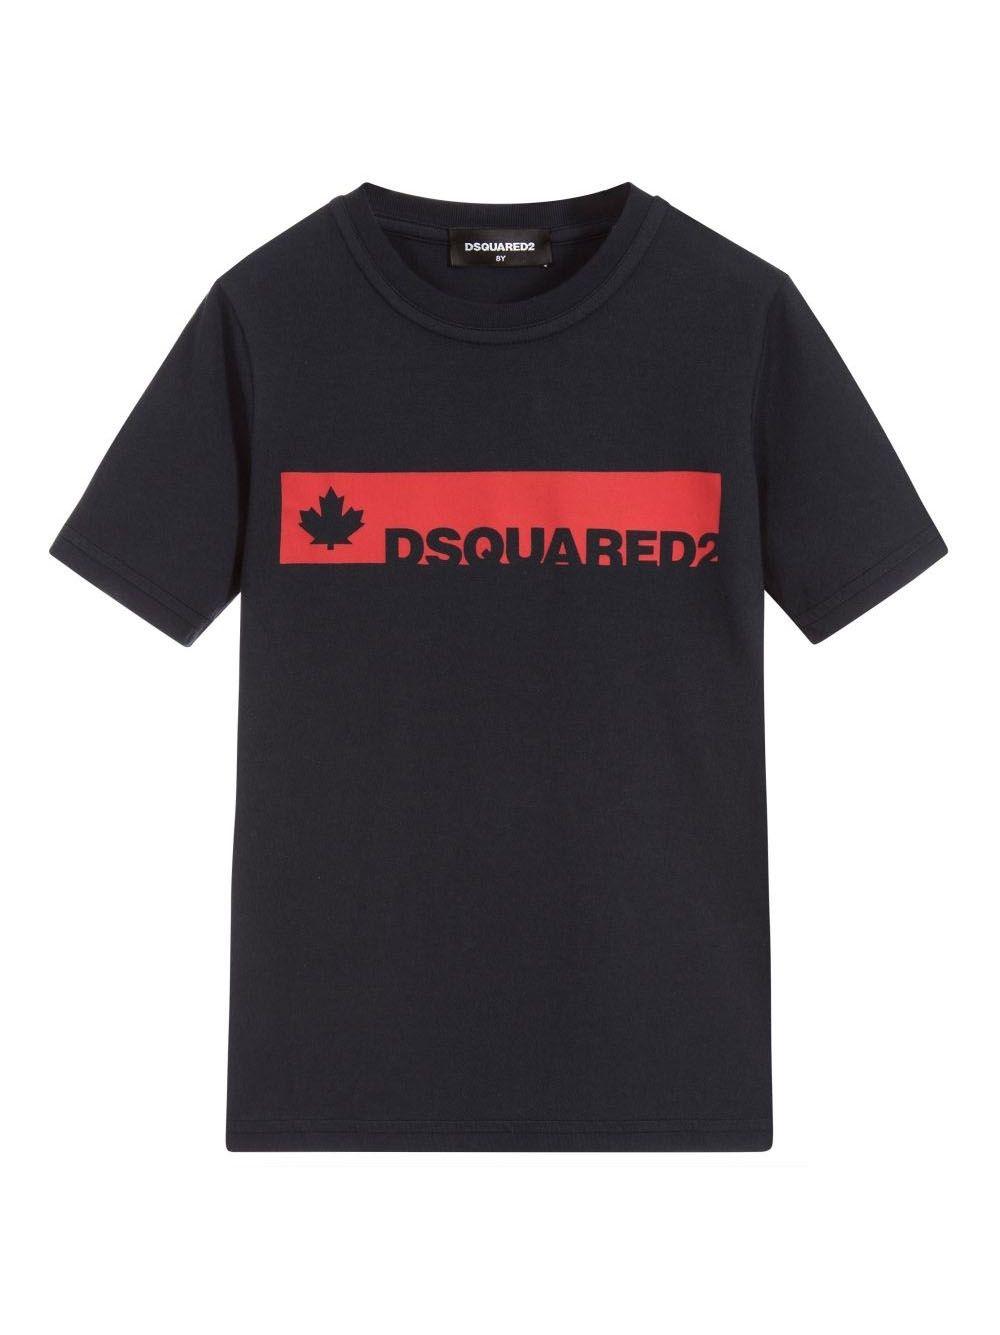 Black Gray and Red Logo - DSQUARED2 Kids Navy & Red Logo T Shirt